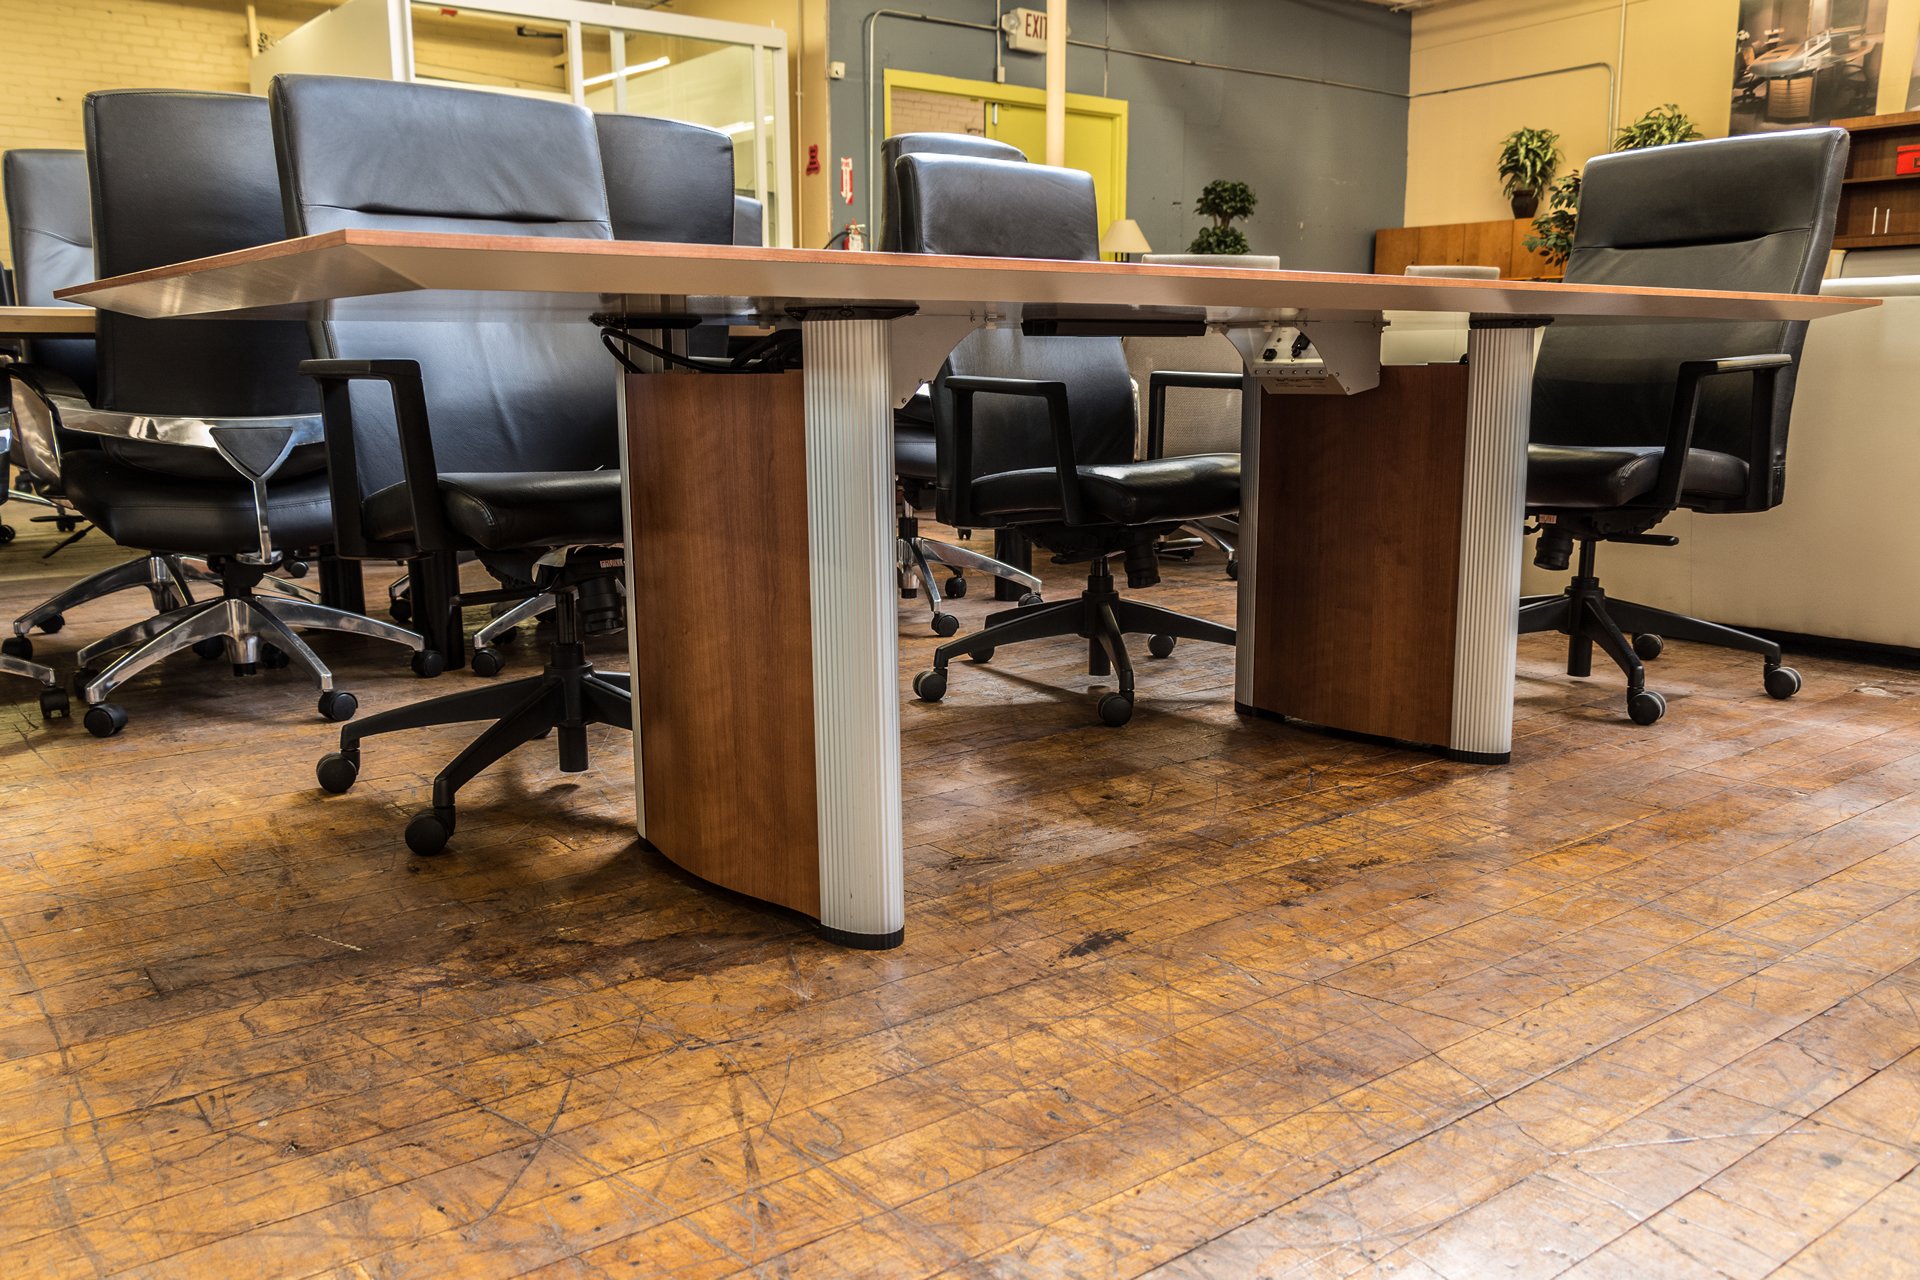 peartreeofficefurniture_peartreeofficefurniture_peartreeofficefurniture_nienkamper-vox-8-x-3-5-cherry-laminate-tapered-edge-conference-table-4.jpg